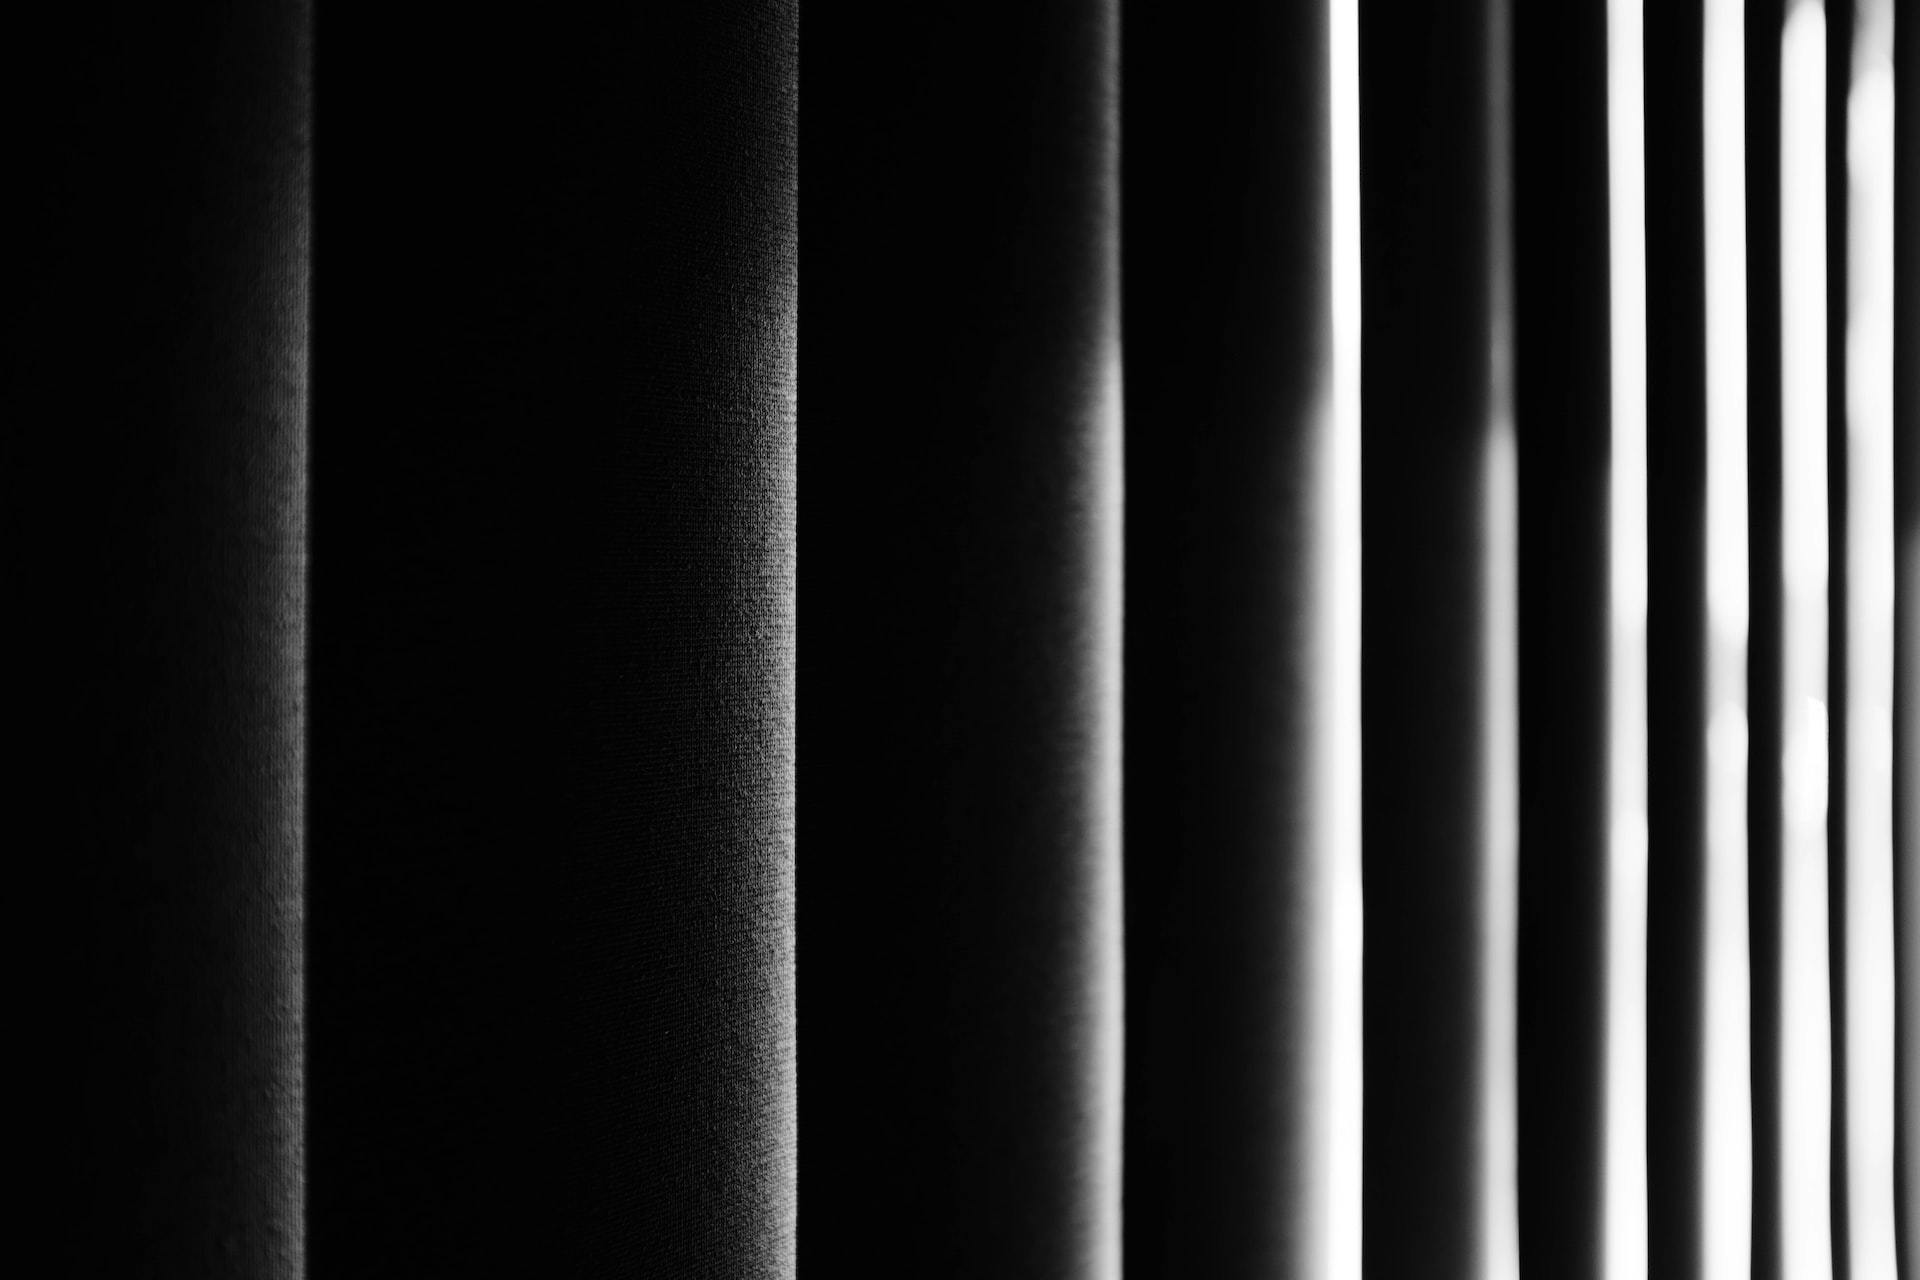 A close-up shot of the vertical bars of a prison cell